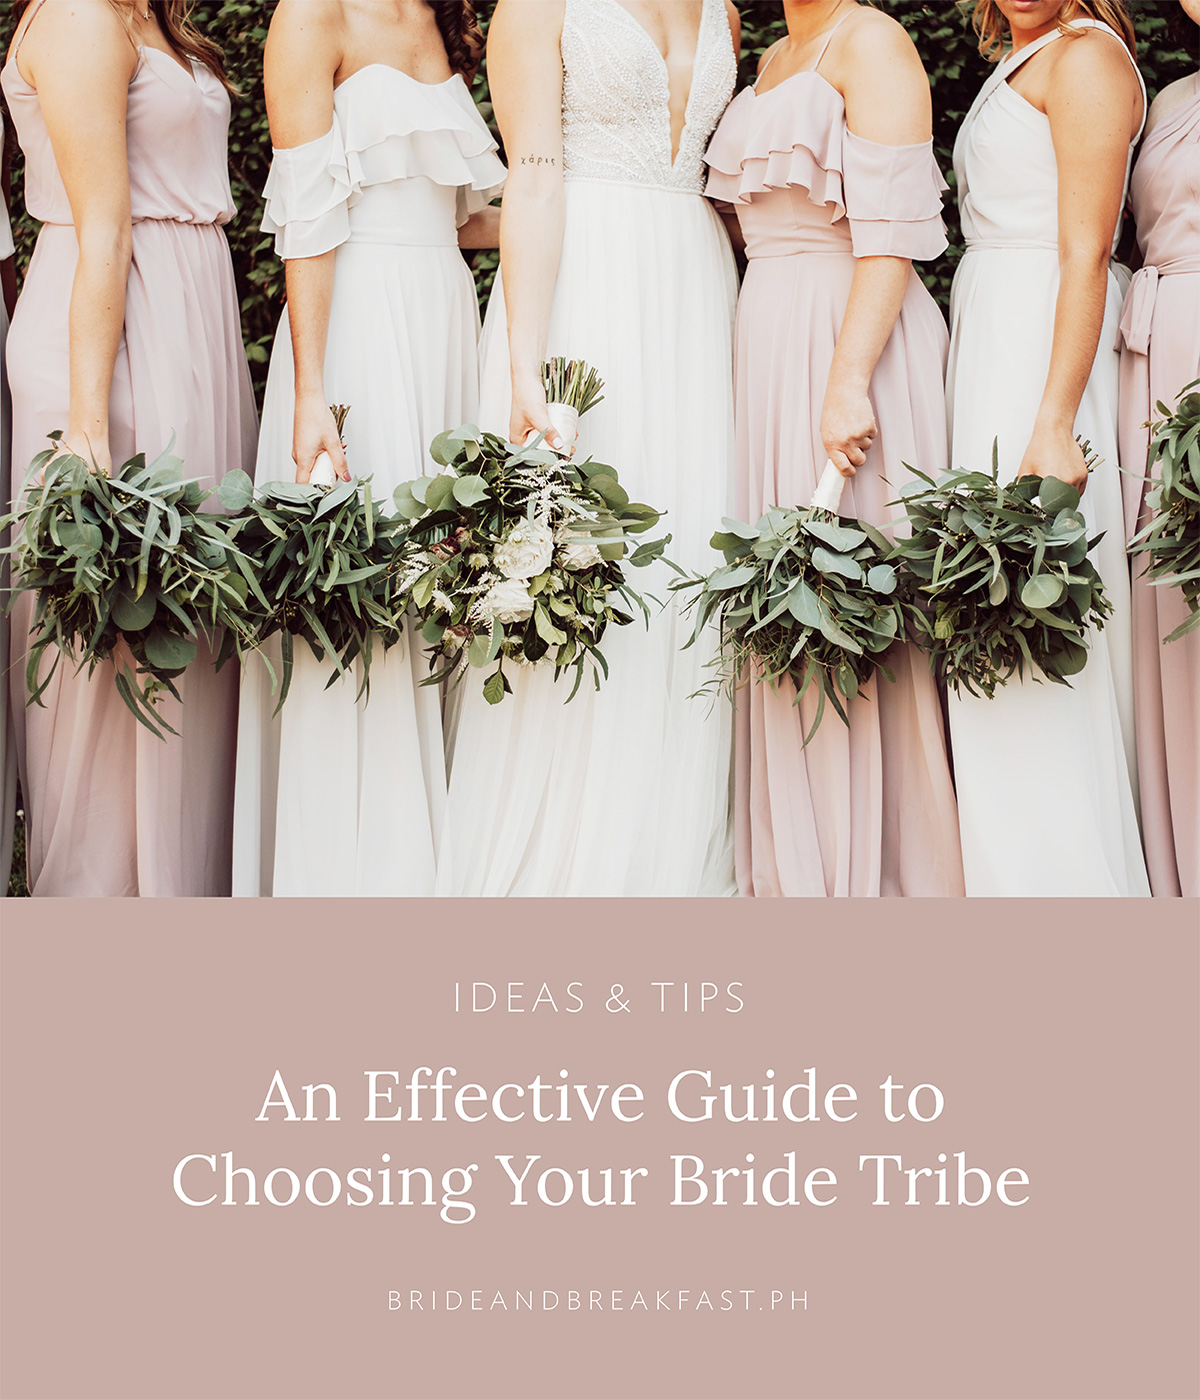 An Effective Guide to Choosing Your Bridesmaids